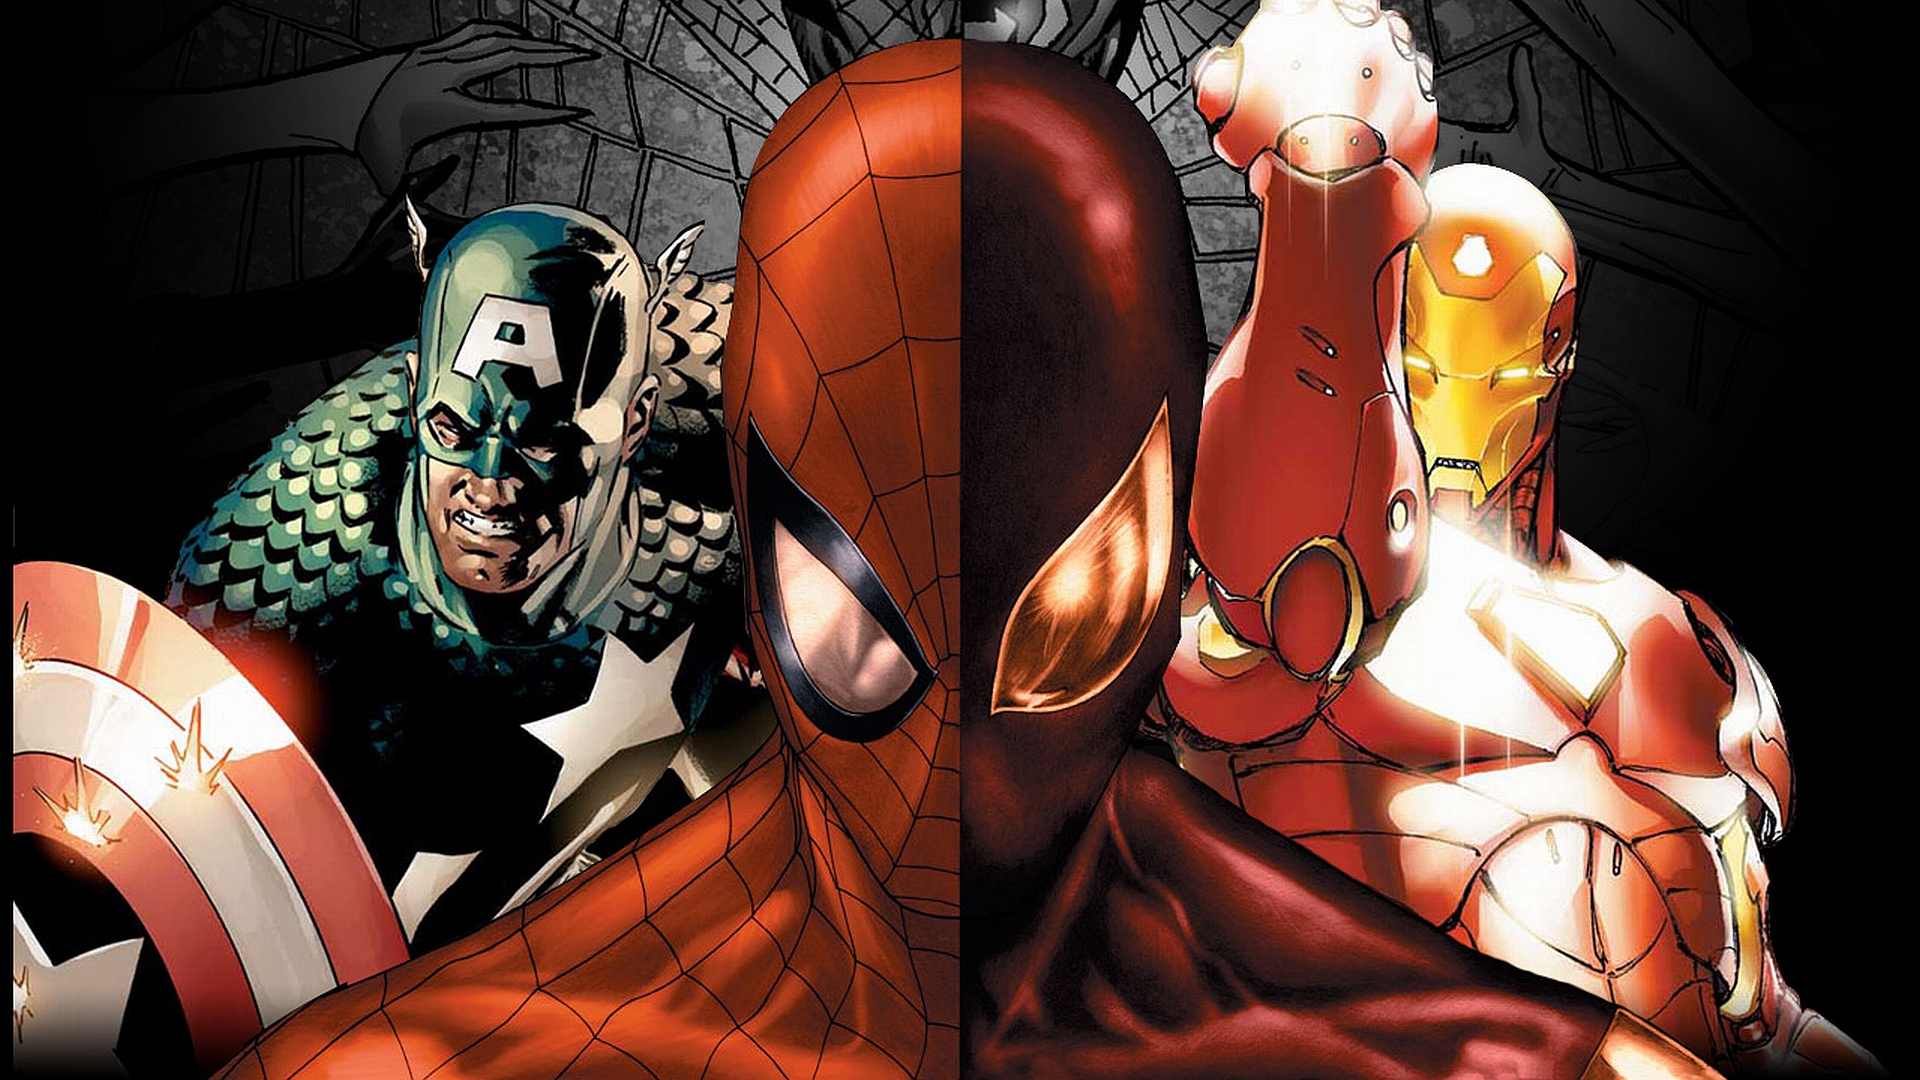 Avengers superheroes Captain America, Spider-Man, and Iron Man featured in a comic-style desktop wallpaper.